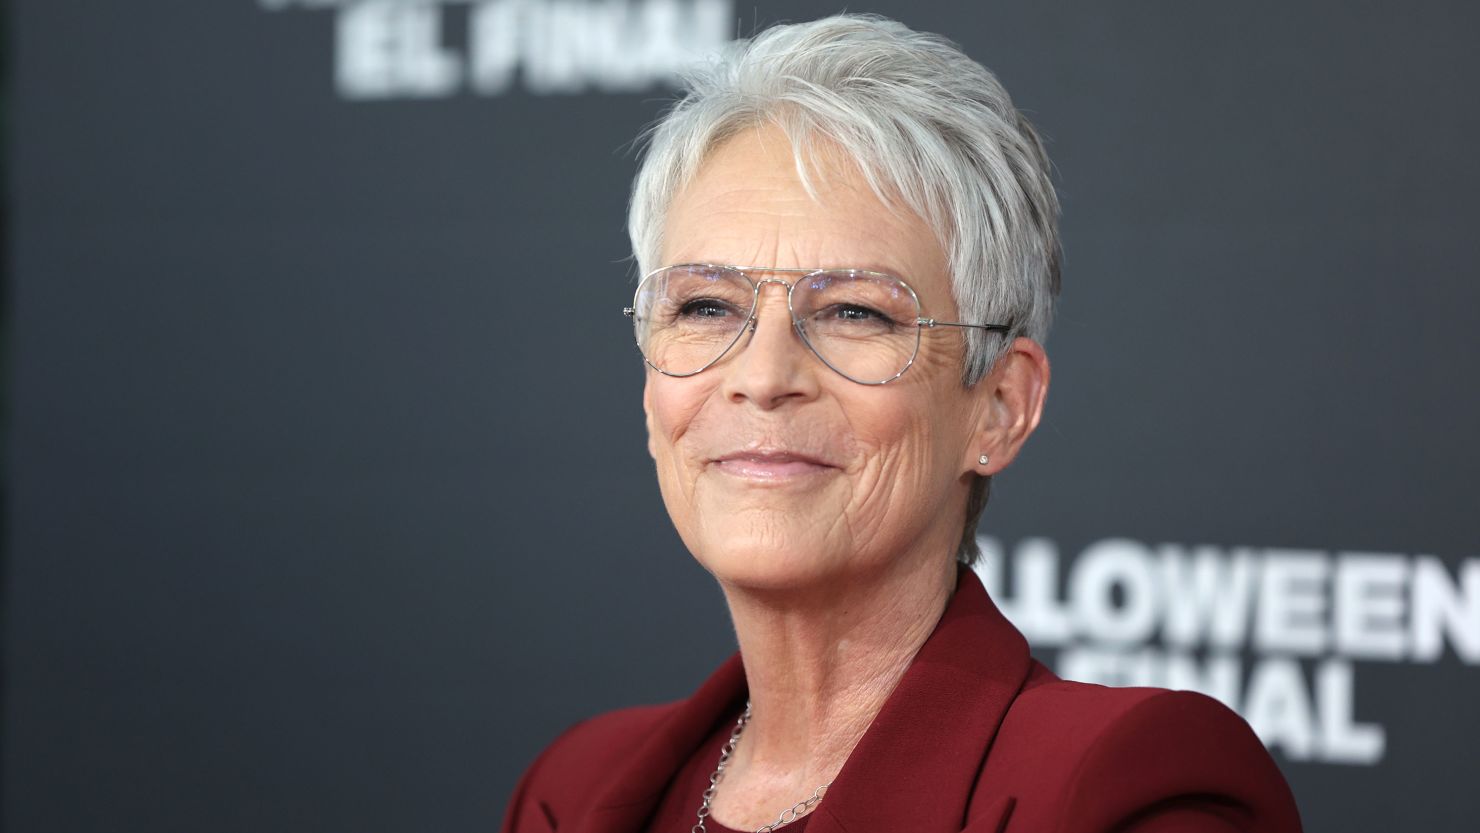 Jamie Lee Curtis Talks Past Movie Roles, From Early Struggles in ‘Trading Places’ to Winning an Oscar